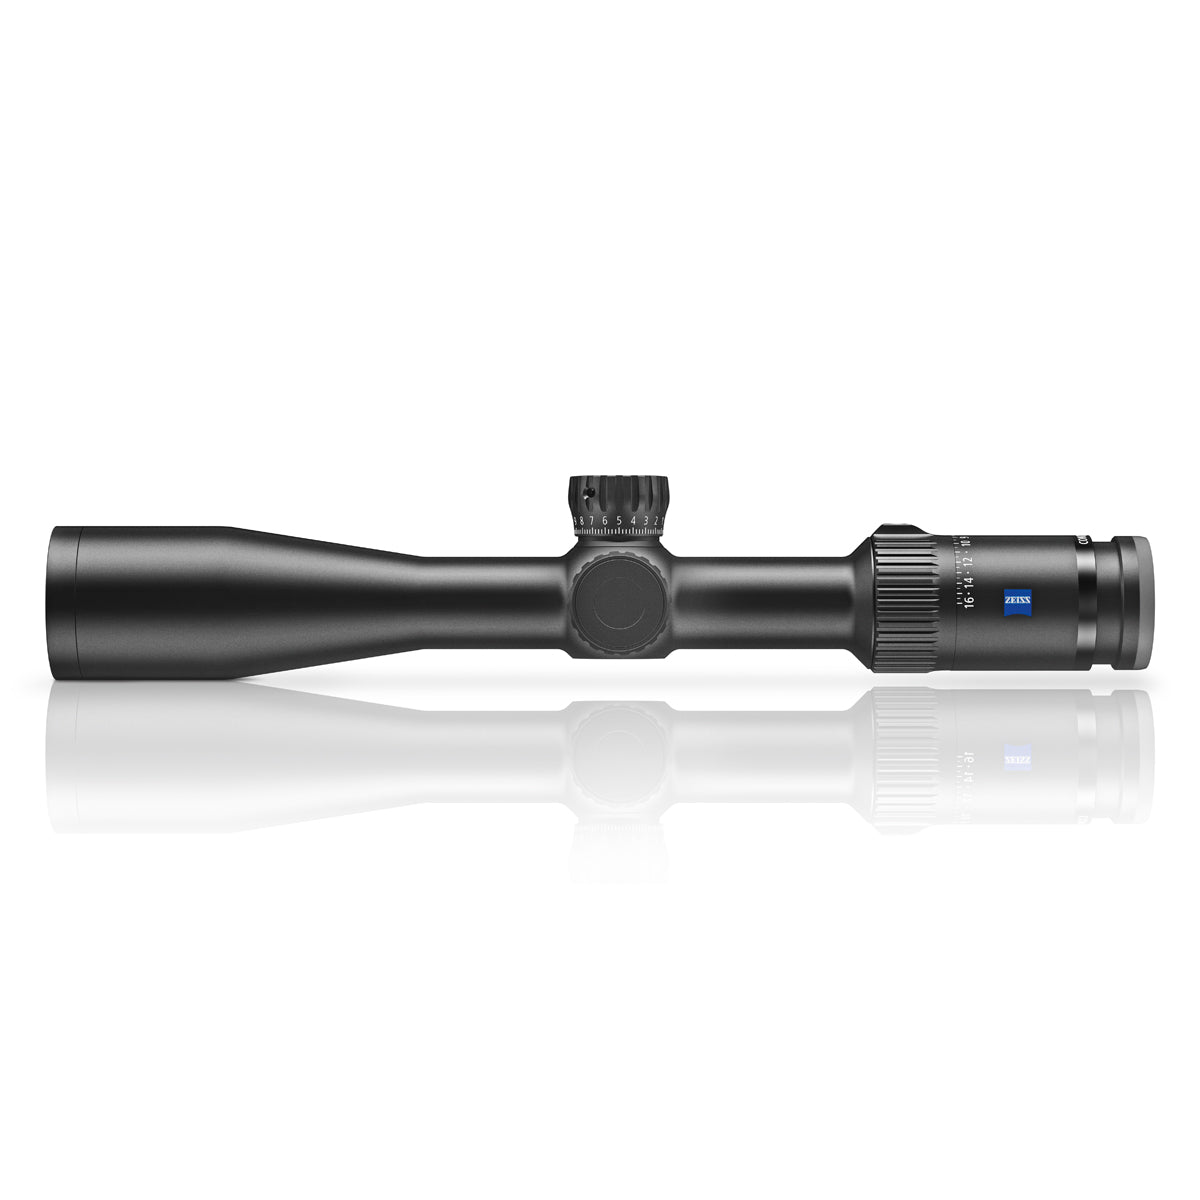 Zeiss Conquest V4 4-16x44 Riflescope ZMOA-2 Reticle in Zeiss Conquest V4 4-16x44 Riflescope ZMOA-2 Reticle by Zeiss | Optics - goHUNT Shop by GOHUNT | Zeiss - GOHUNT Shop